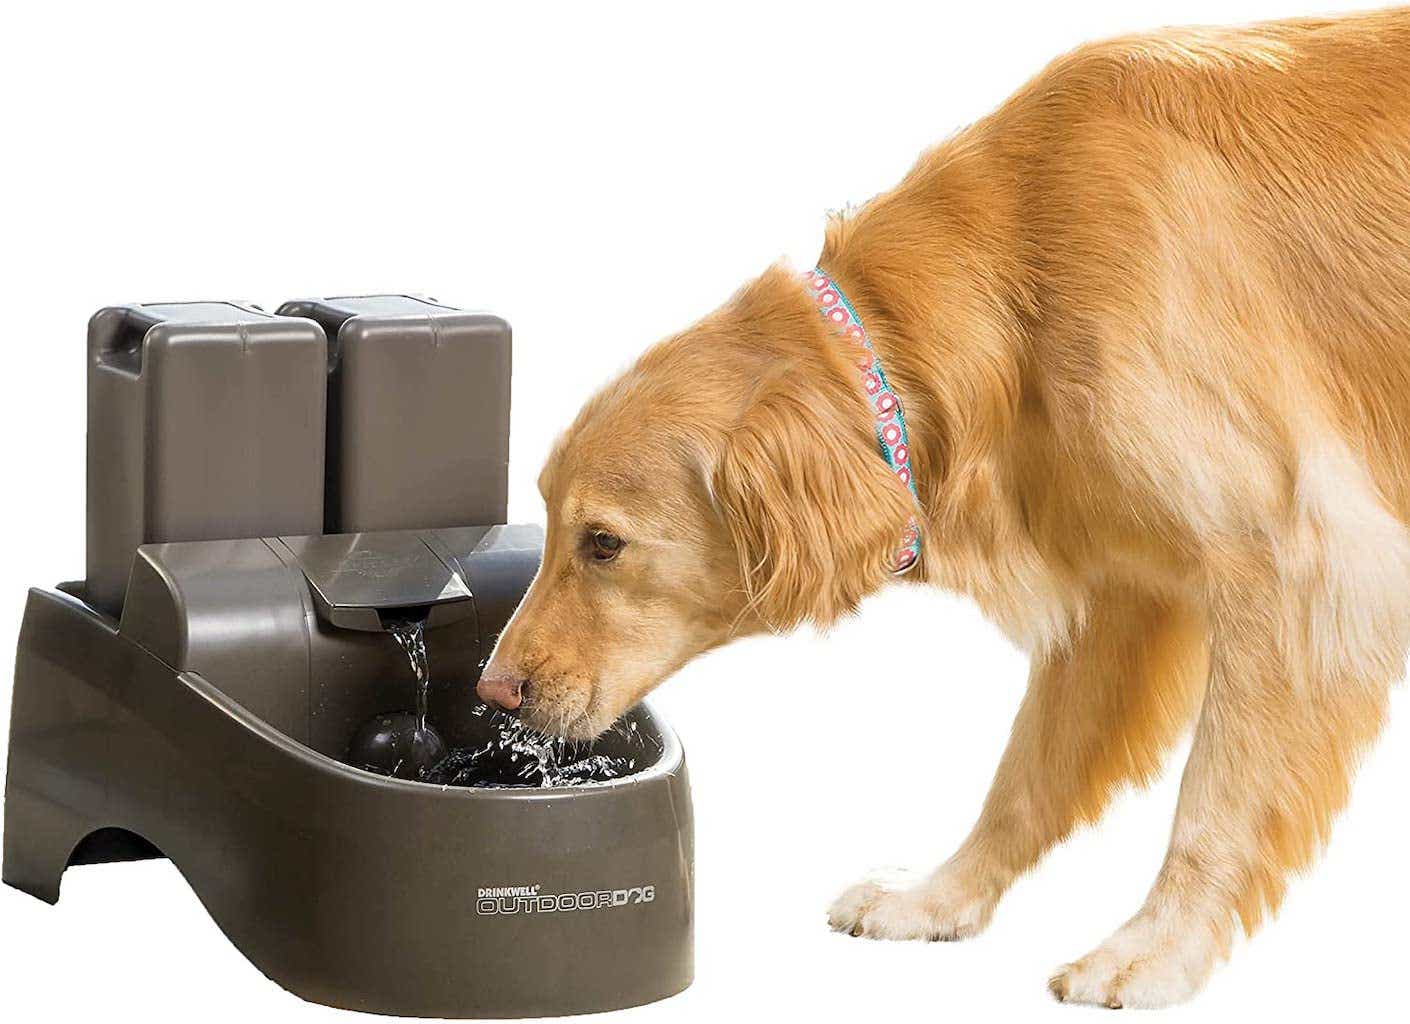 A golden retriever dips its head into a large, plastic, brown fountain.